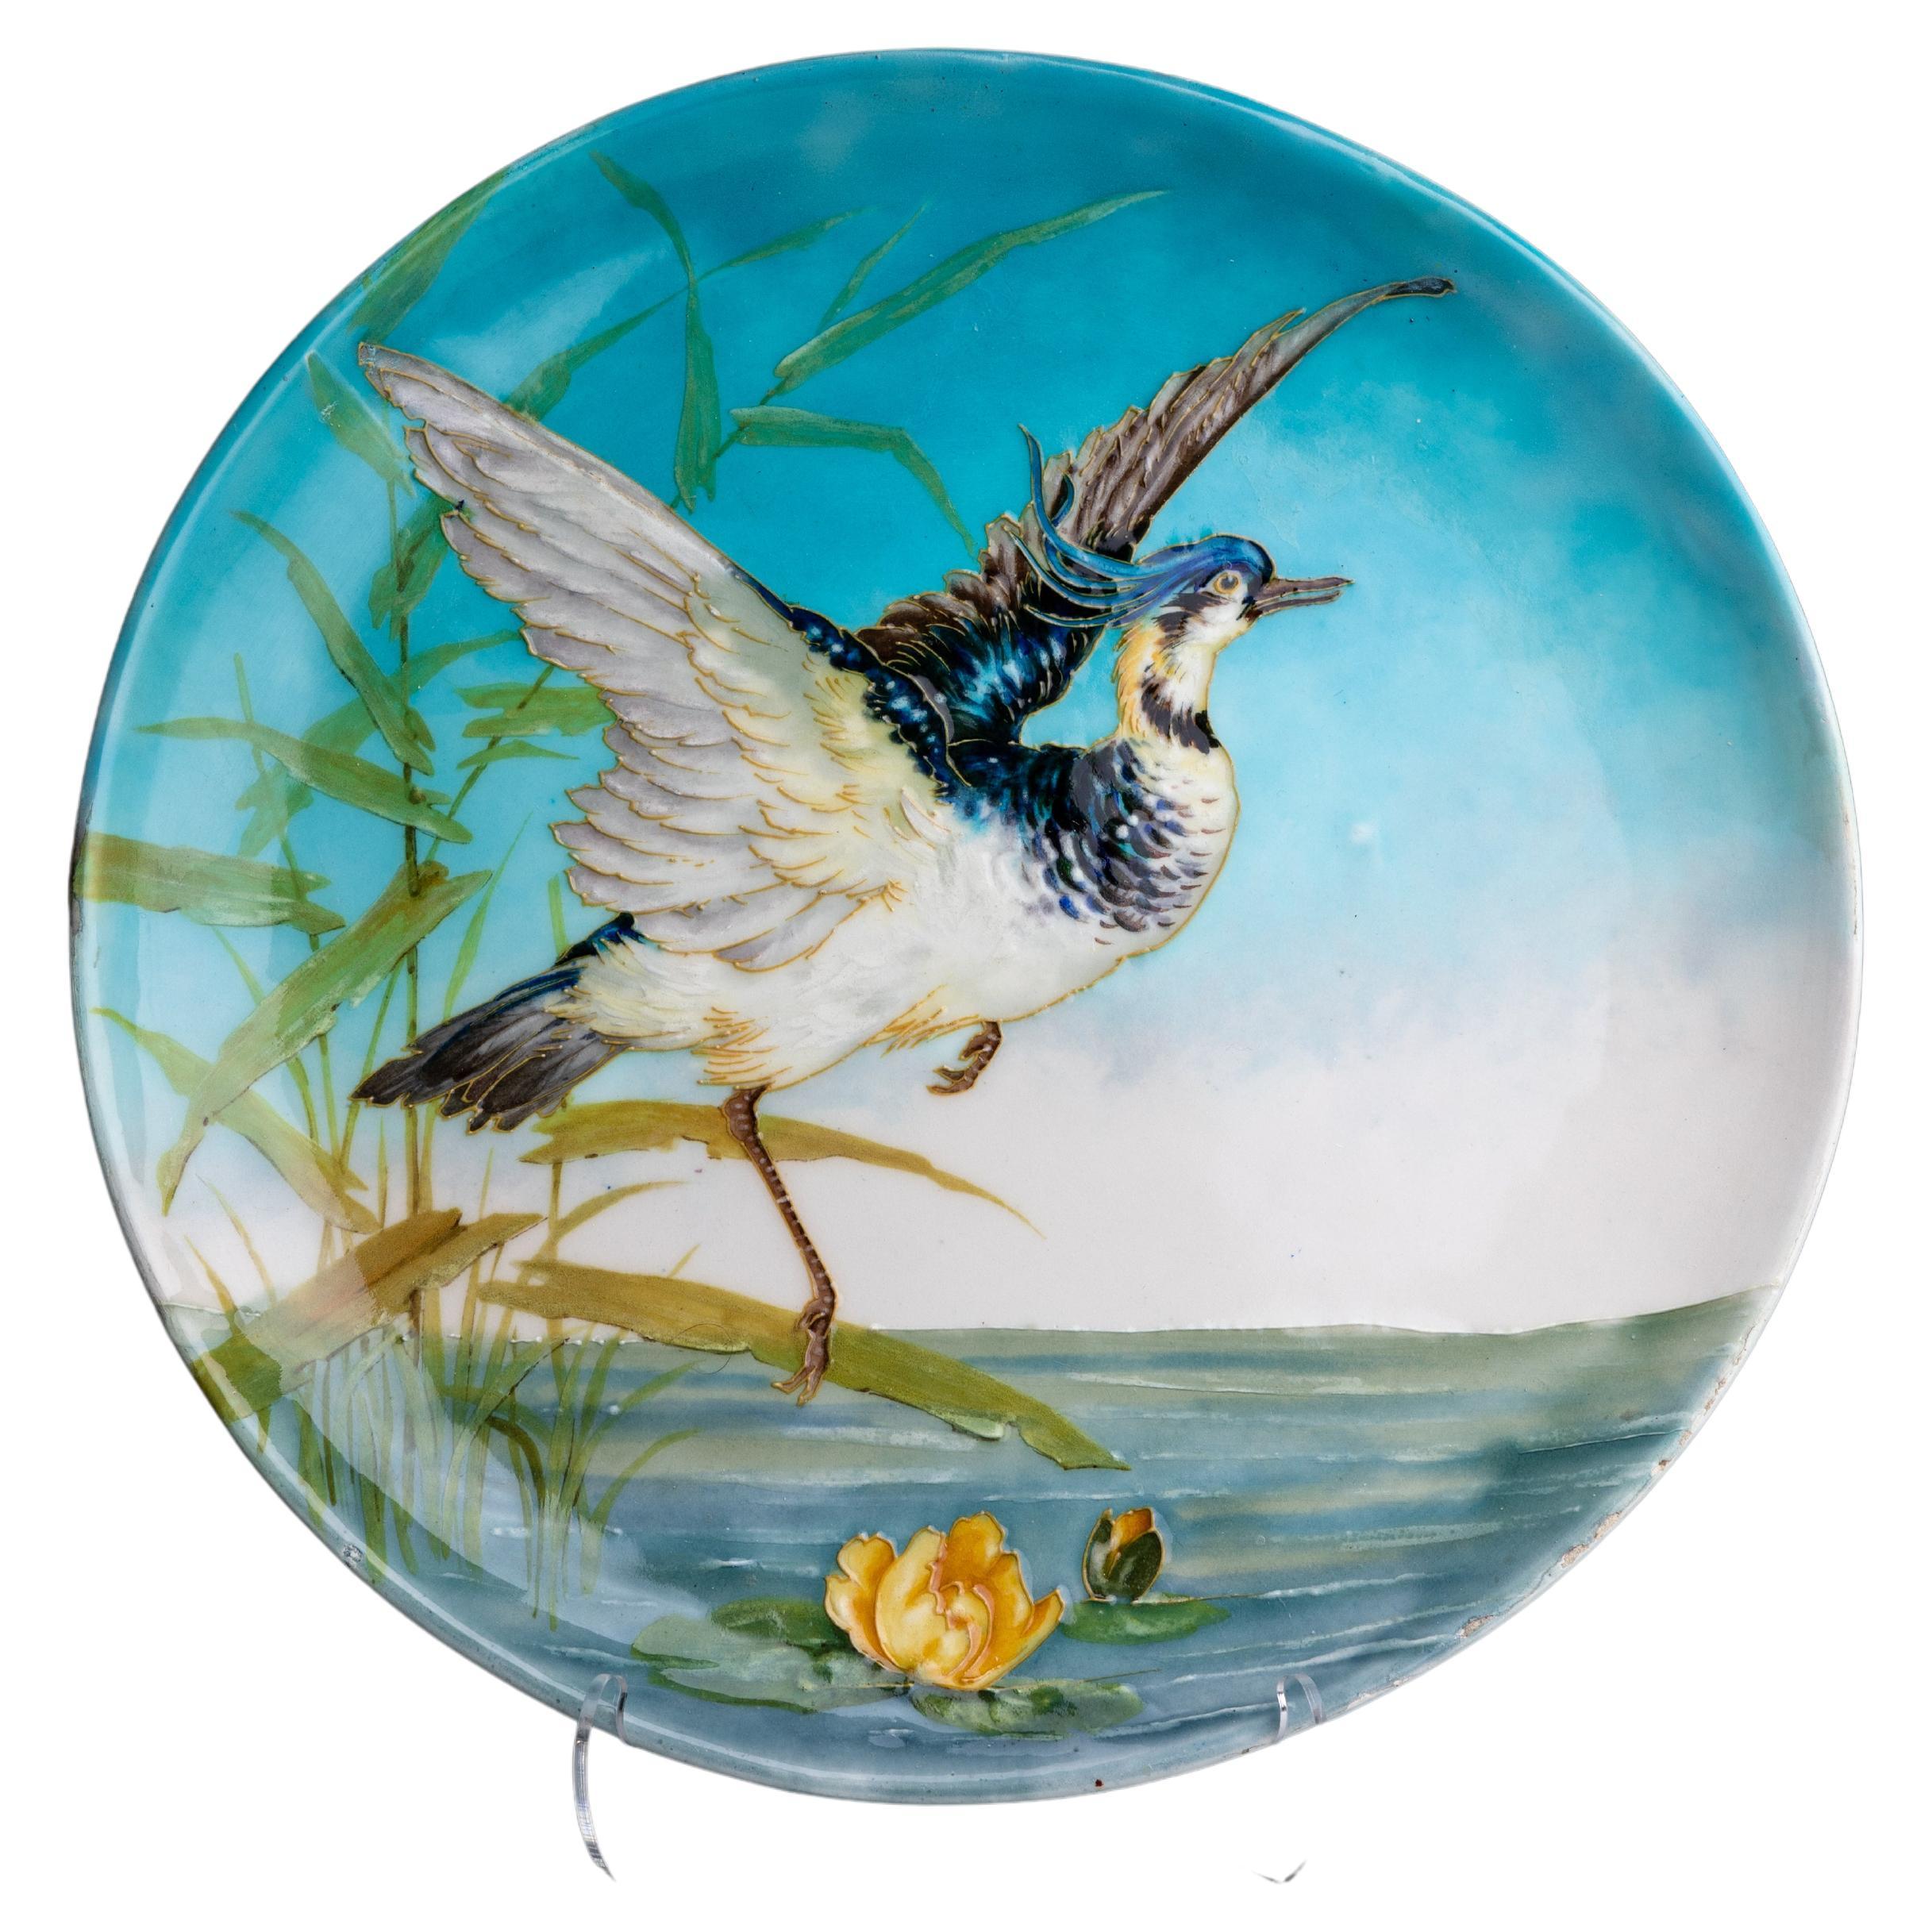 Early 20th Century French French Porcelain Plate by Paul Milet For Sale